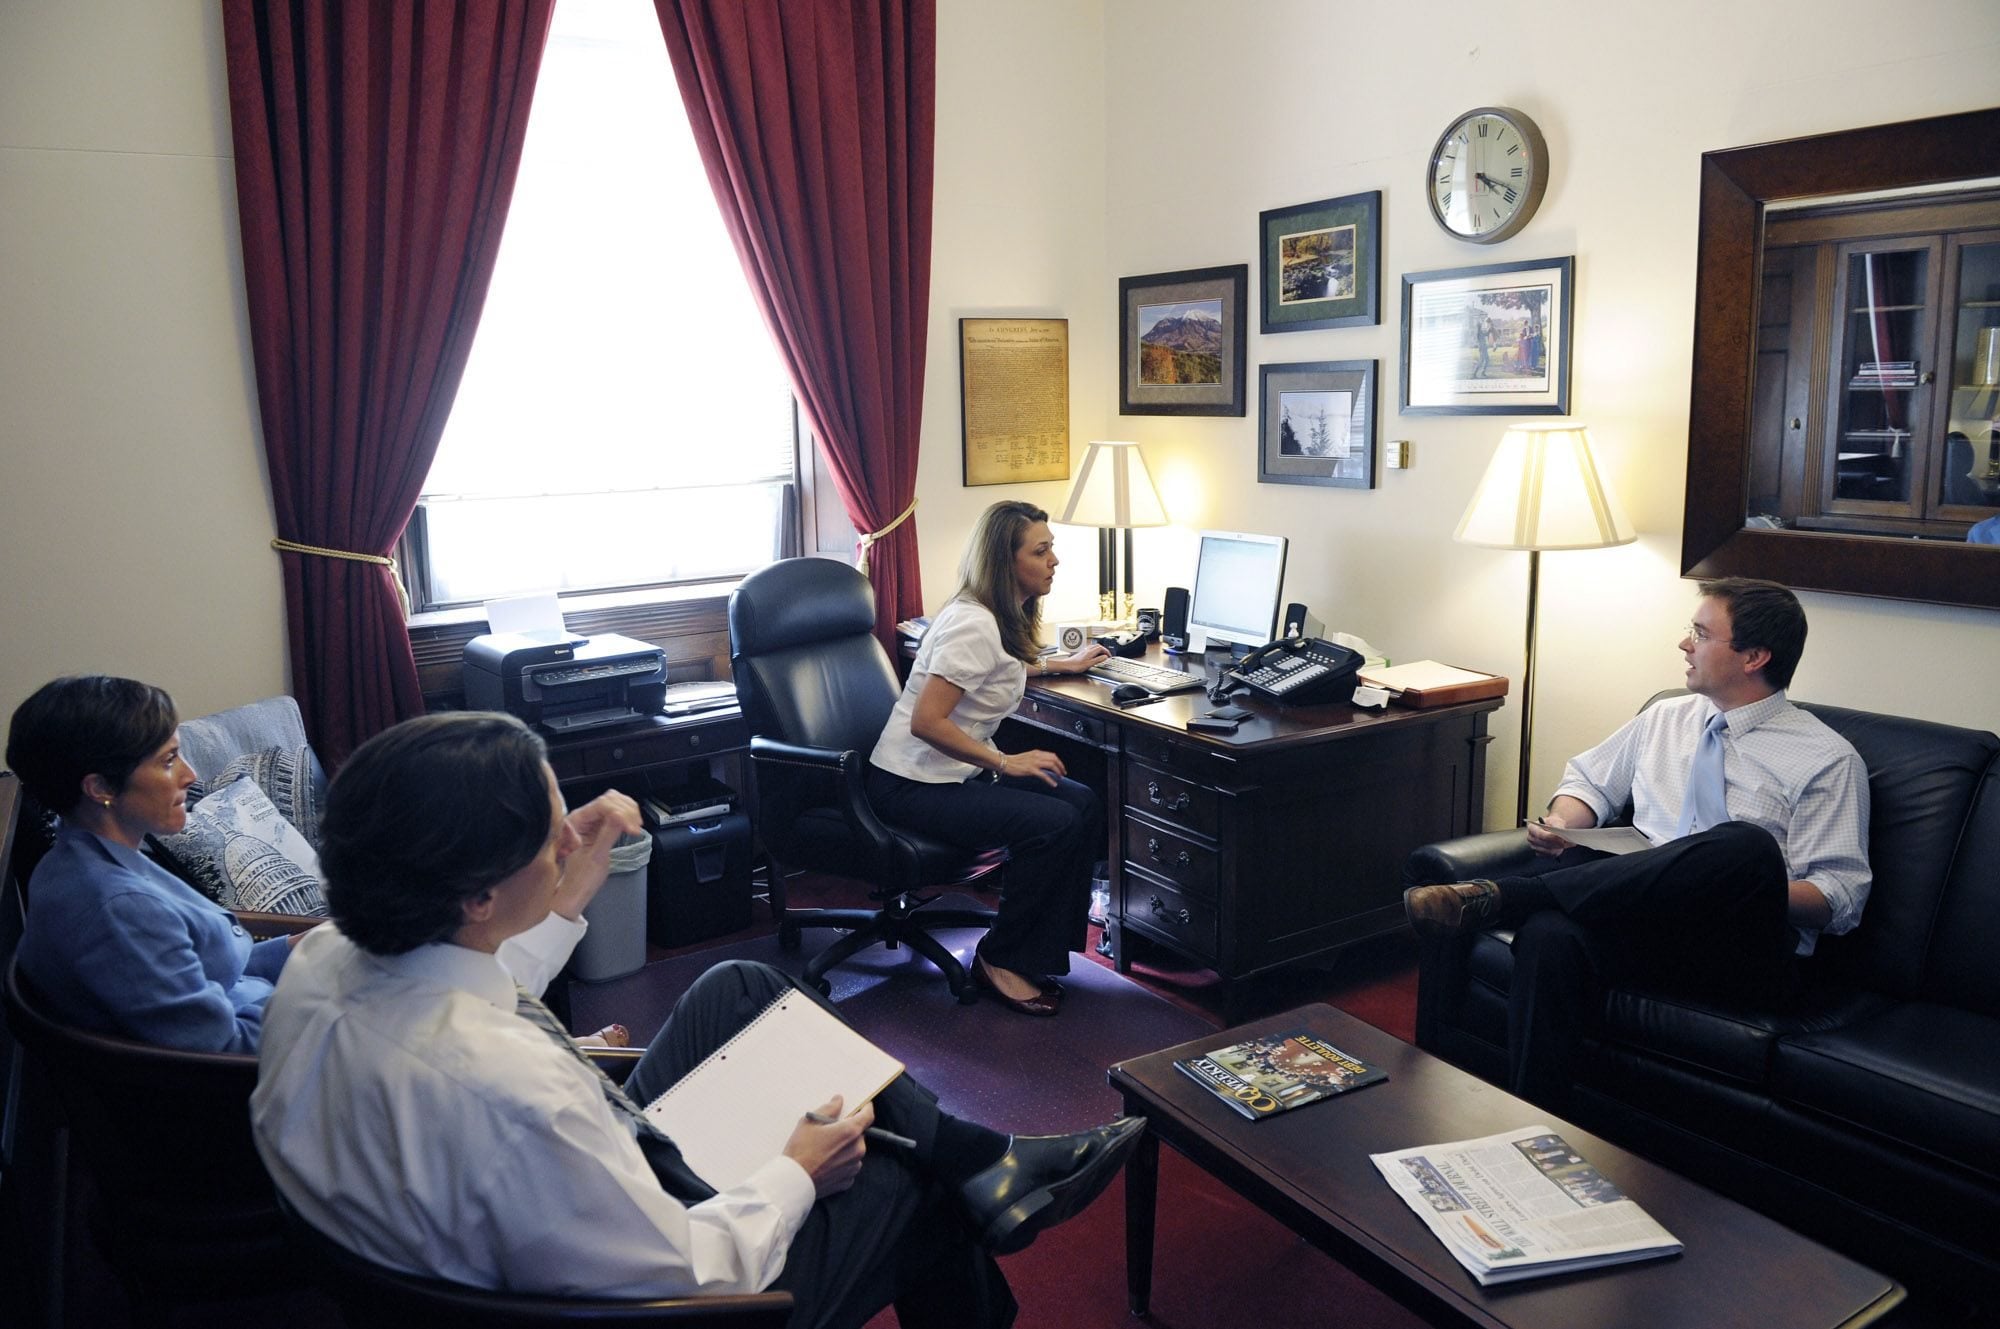 Rep. Jaime Herrera Beutler, R-Camas, center, meets with her legislative and communications staff Monday in her Capitol Hill office in Washington, D.C.